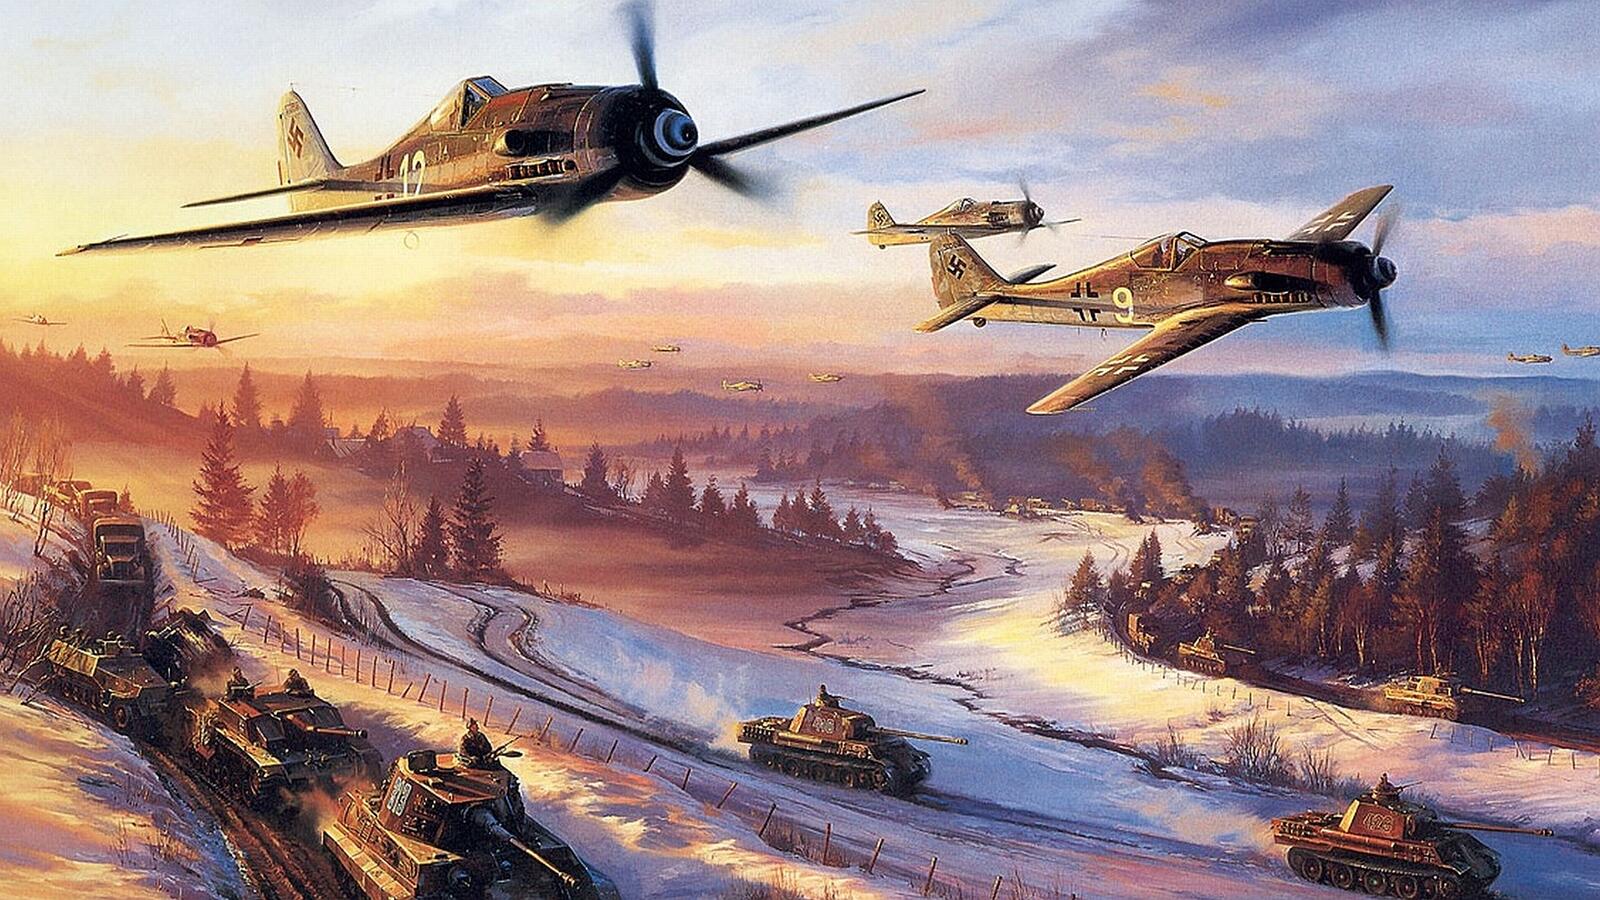 Wallpapers aircraft tanks winter on the desktop